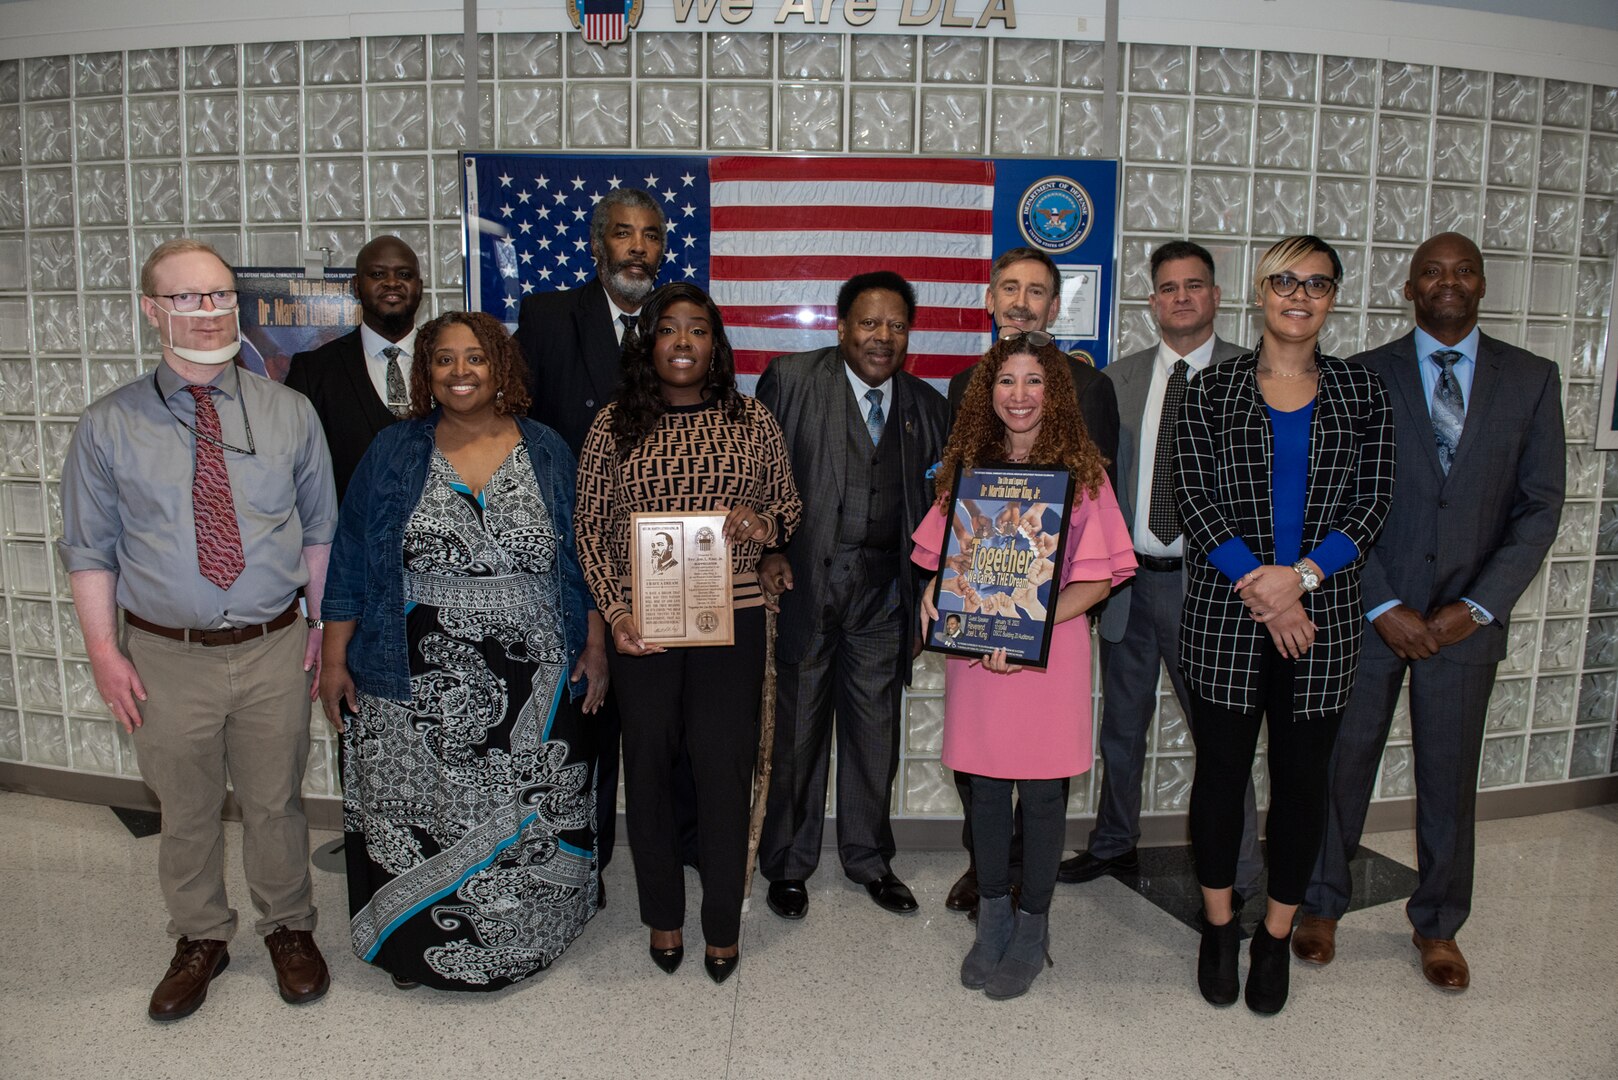 A large group of people posing for a photo. Men and women, dark skinned and light skinned. Two women hold a plaque and a poster.